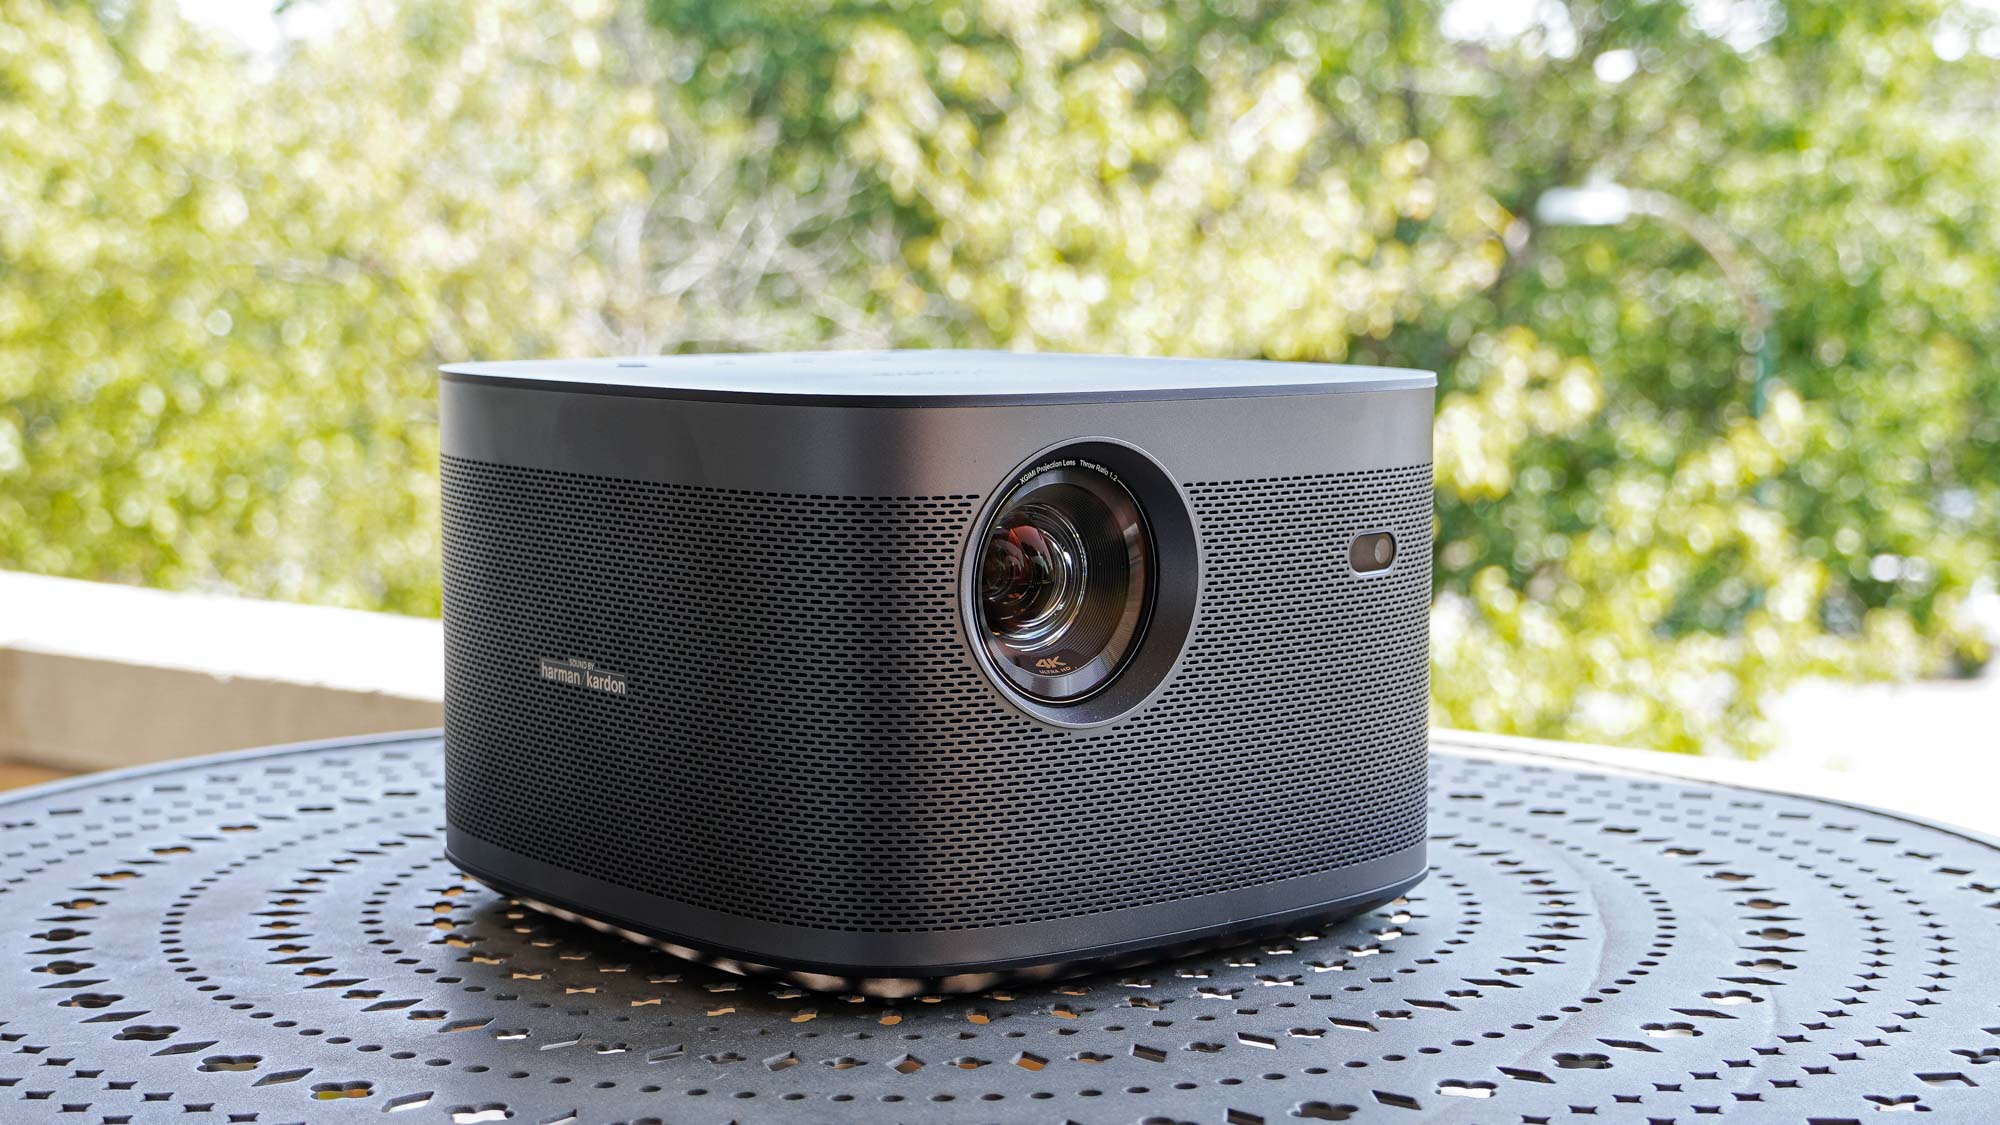 XGIMI Horizon Review: Home cinema in a box